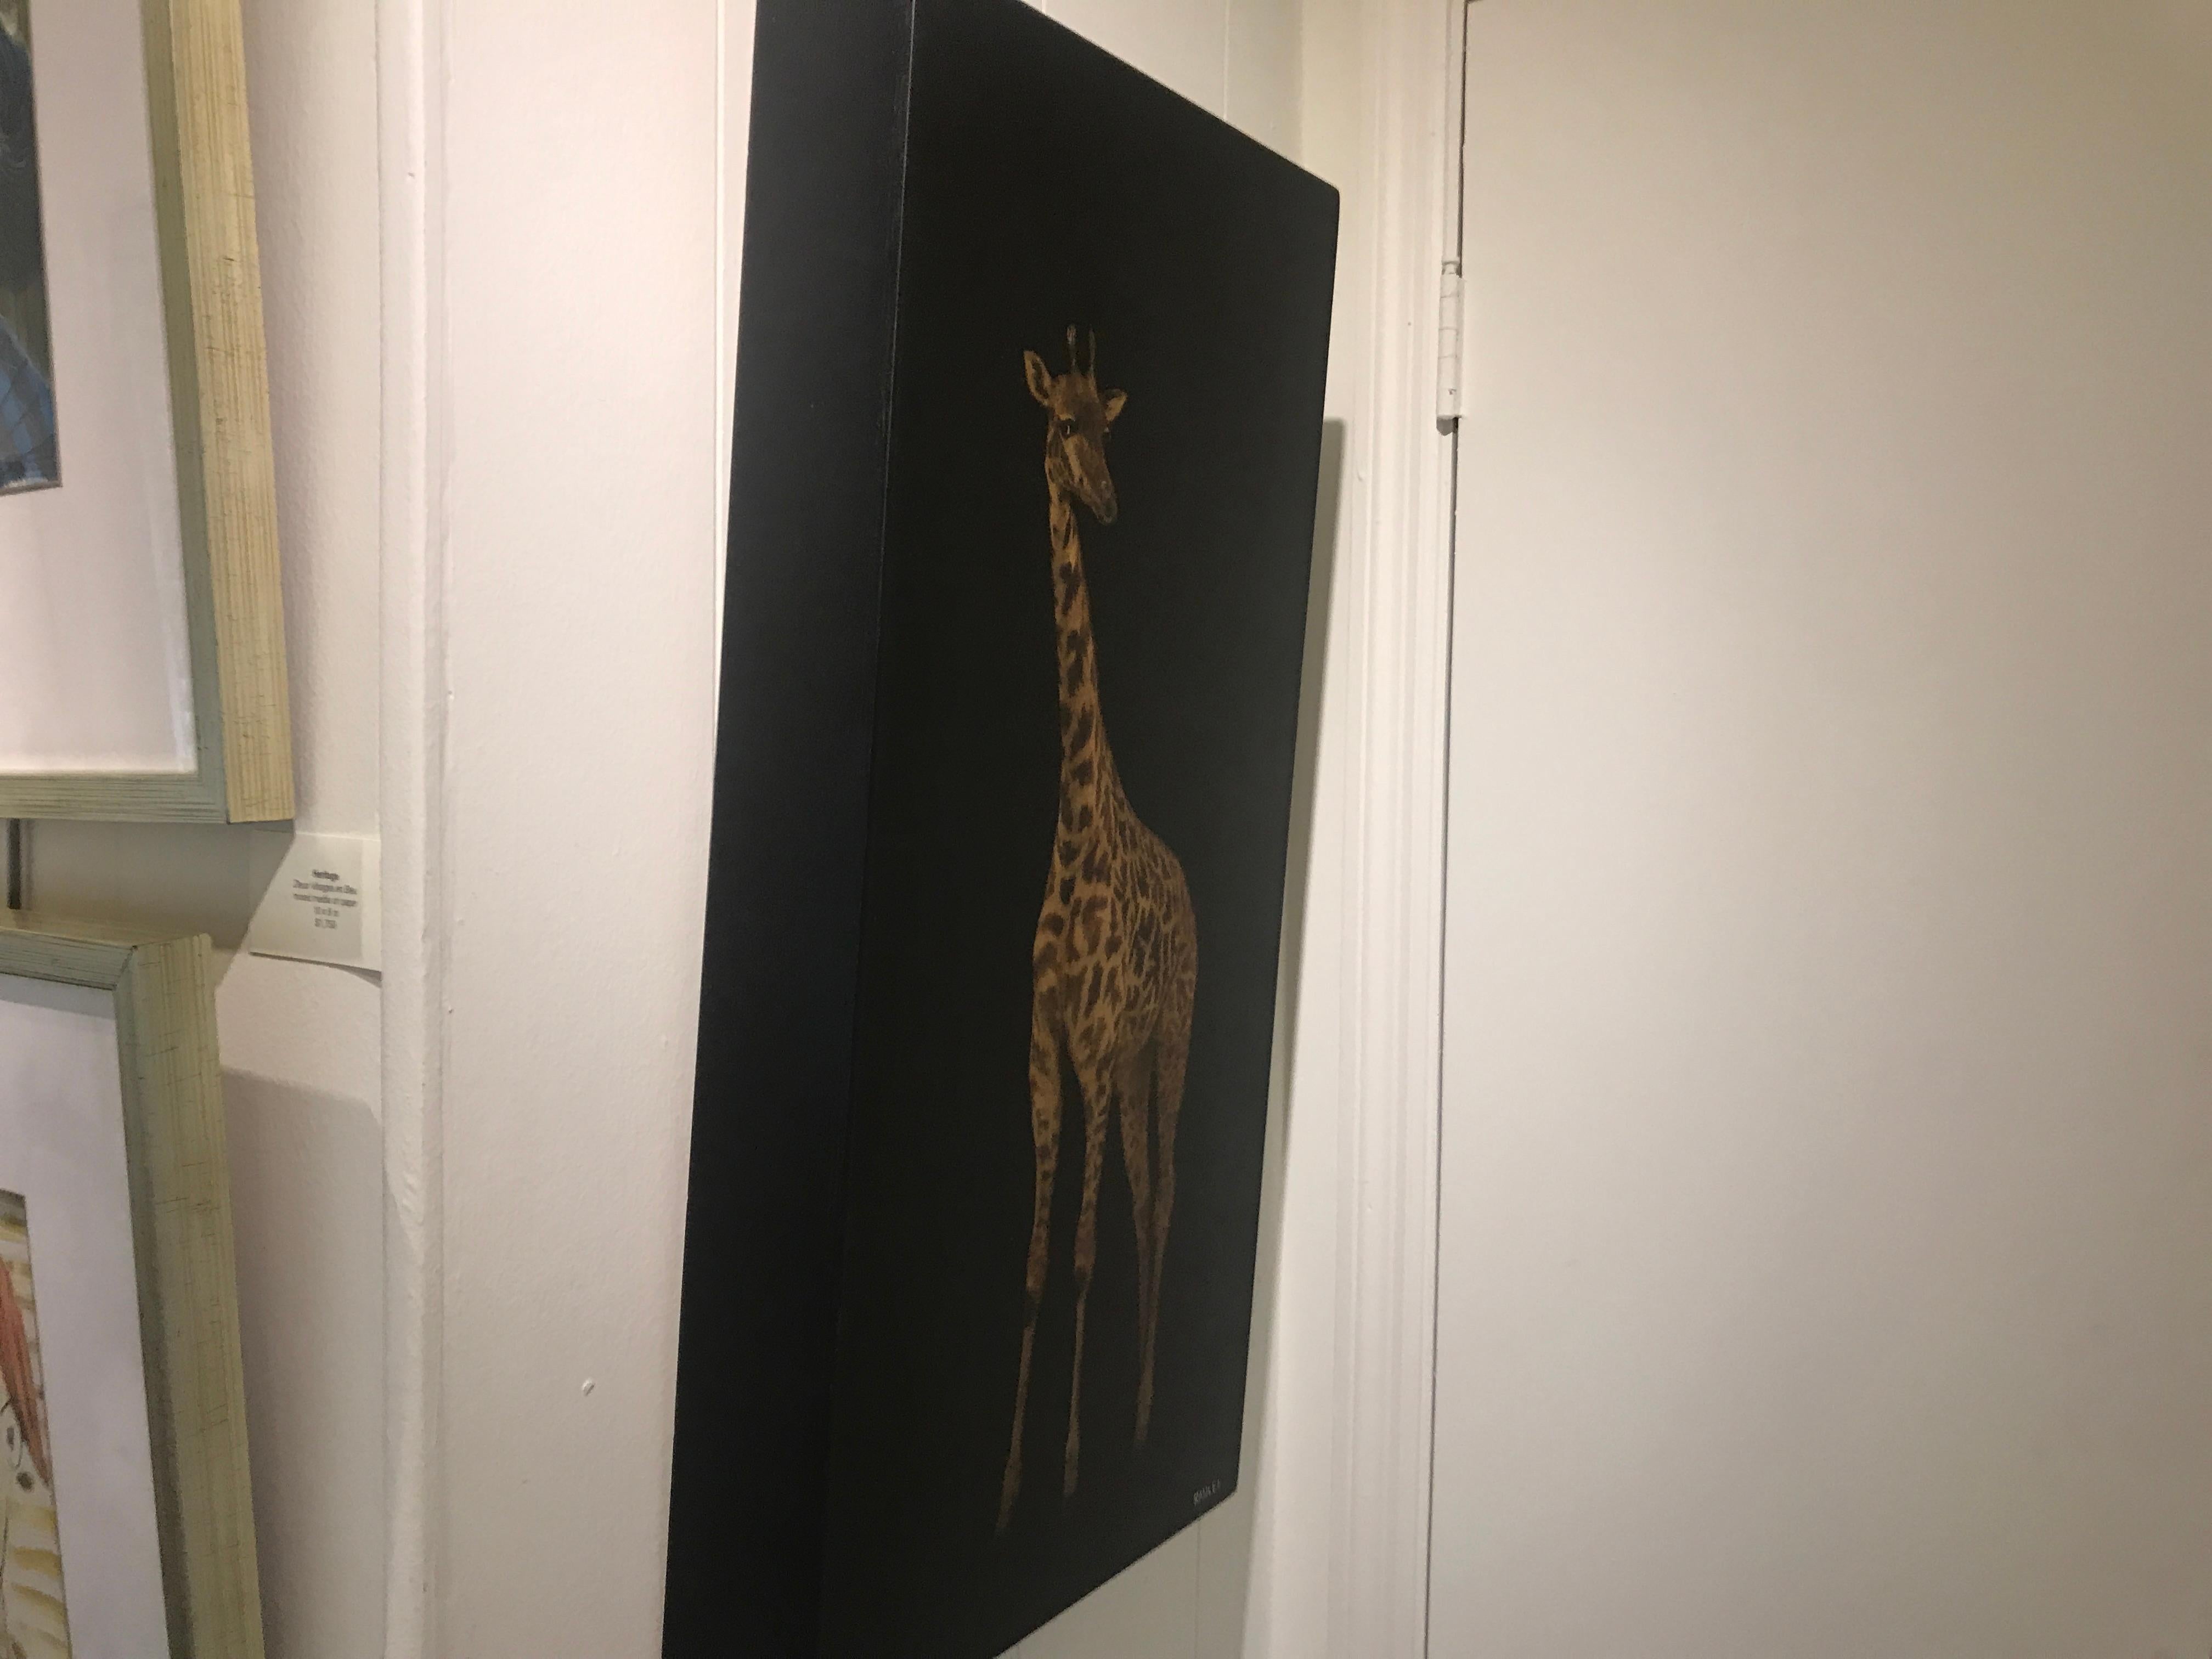 Dawne photographed this beautiful giraffe on a Safari trip in Africa last summer.  Dawne’s current body of work is made up of mixed media, wax and photography all harmonizing beautifully on the canvas and panels she paints on. She won’t tell us all